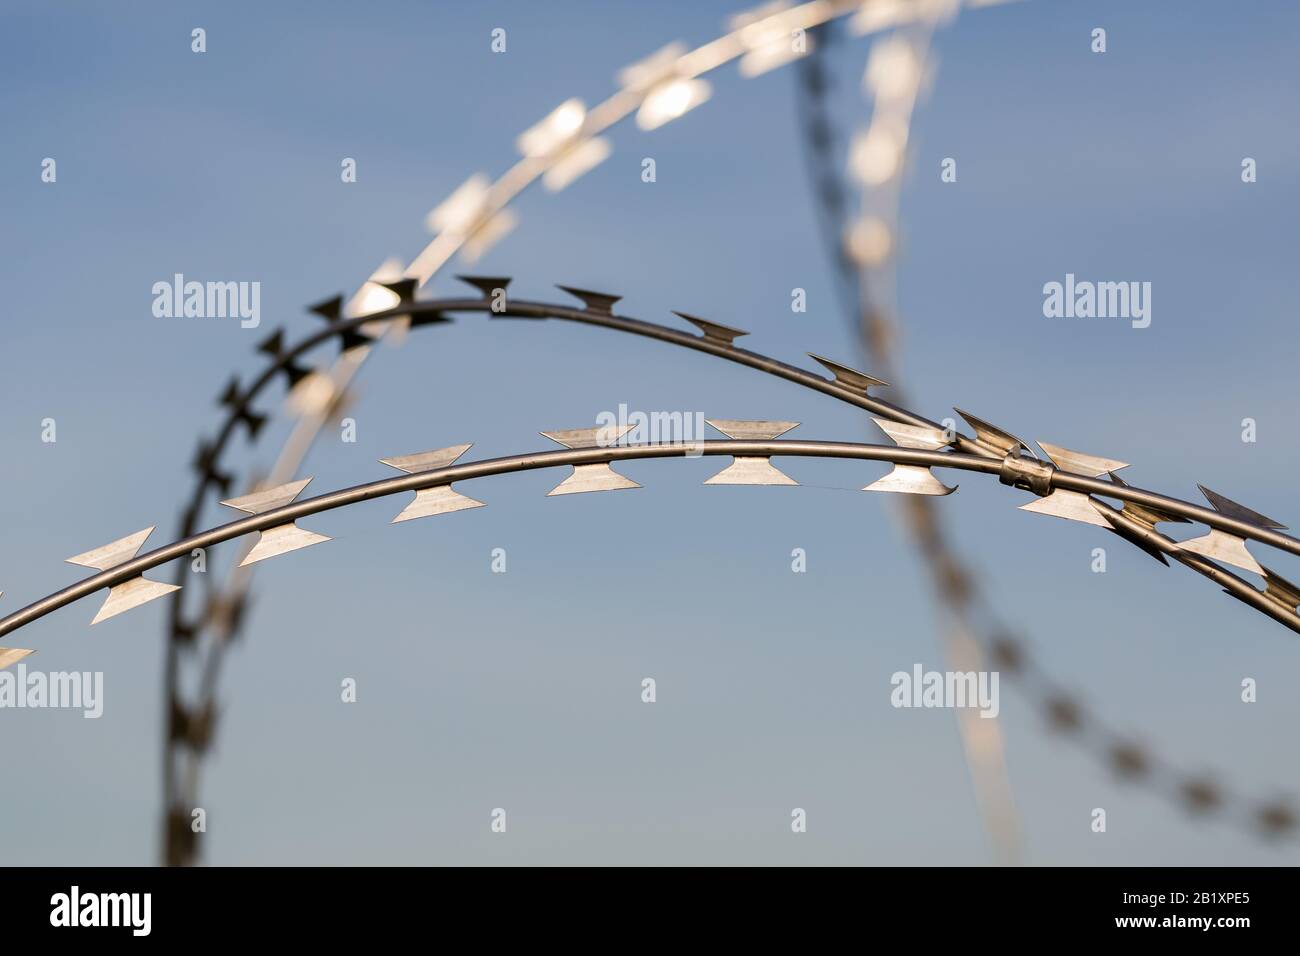 Detail / isolated view on sharp, curved razor wire. Blue (sky) background. Used at borders, airports, prison camps, military bases. Stock Photo